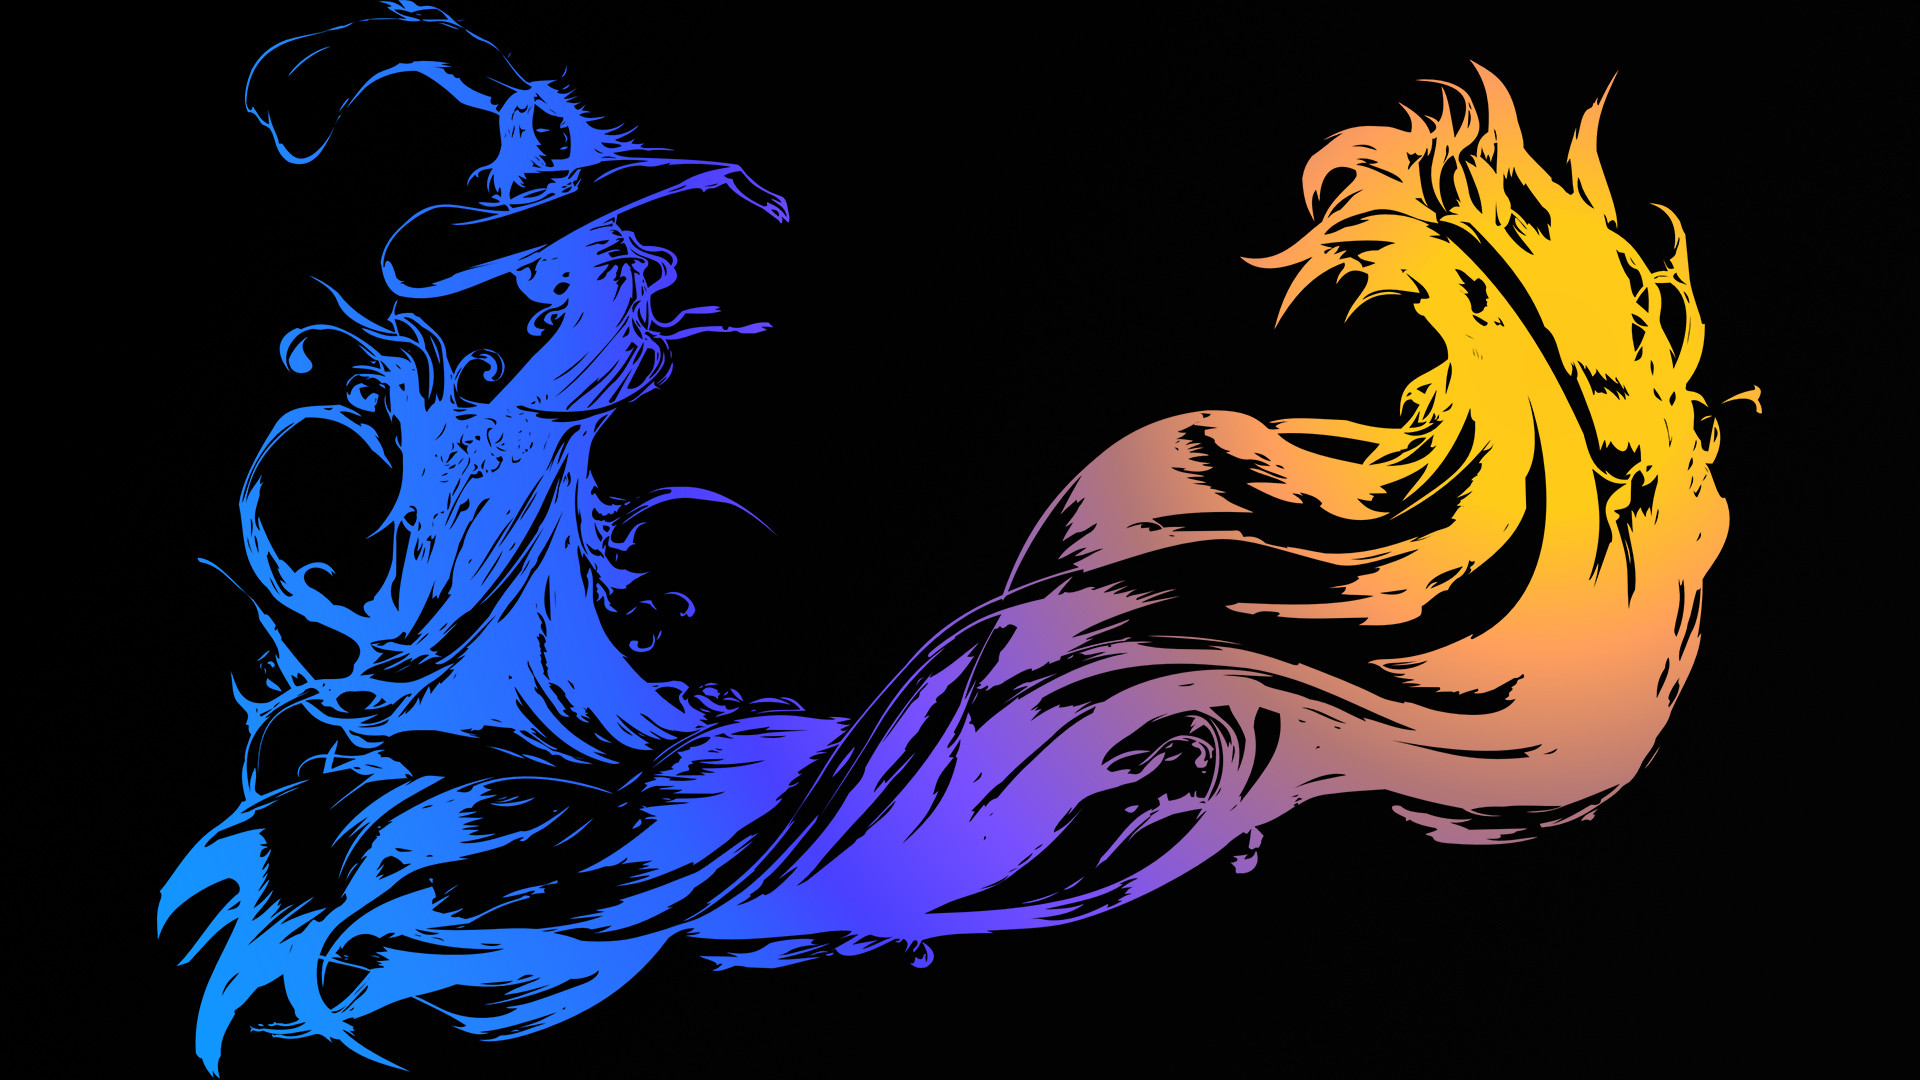 1920x1080 Someone requested it, so I made a Final Fantasy X wallpaper. Here it is!